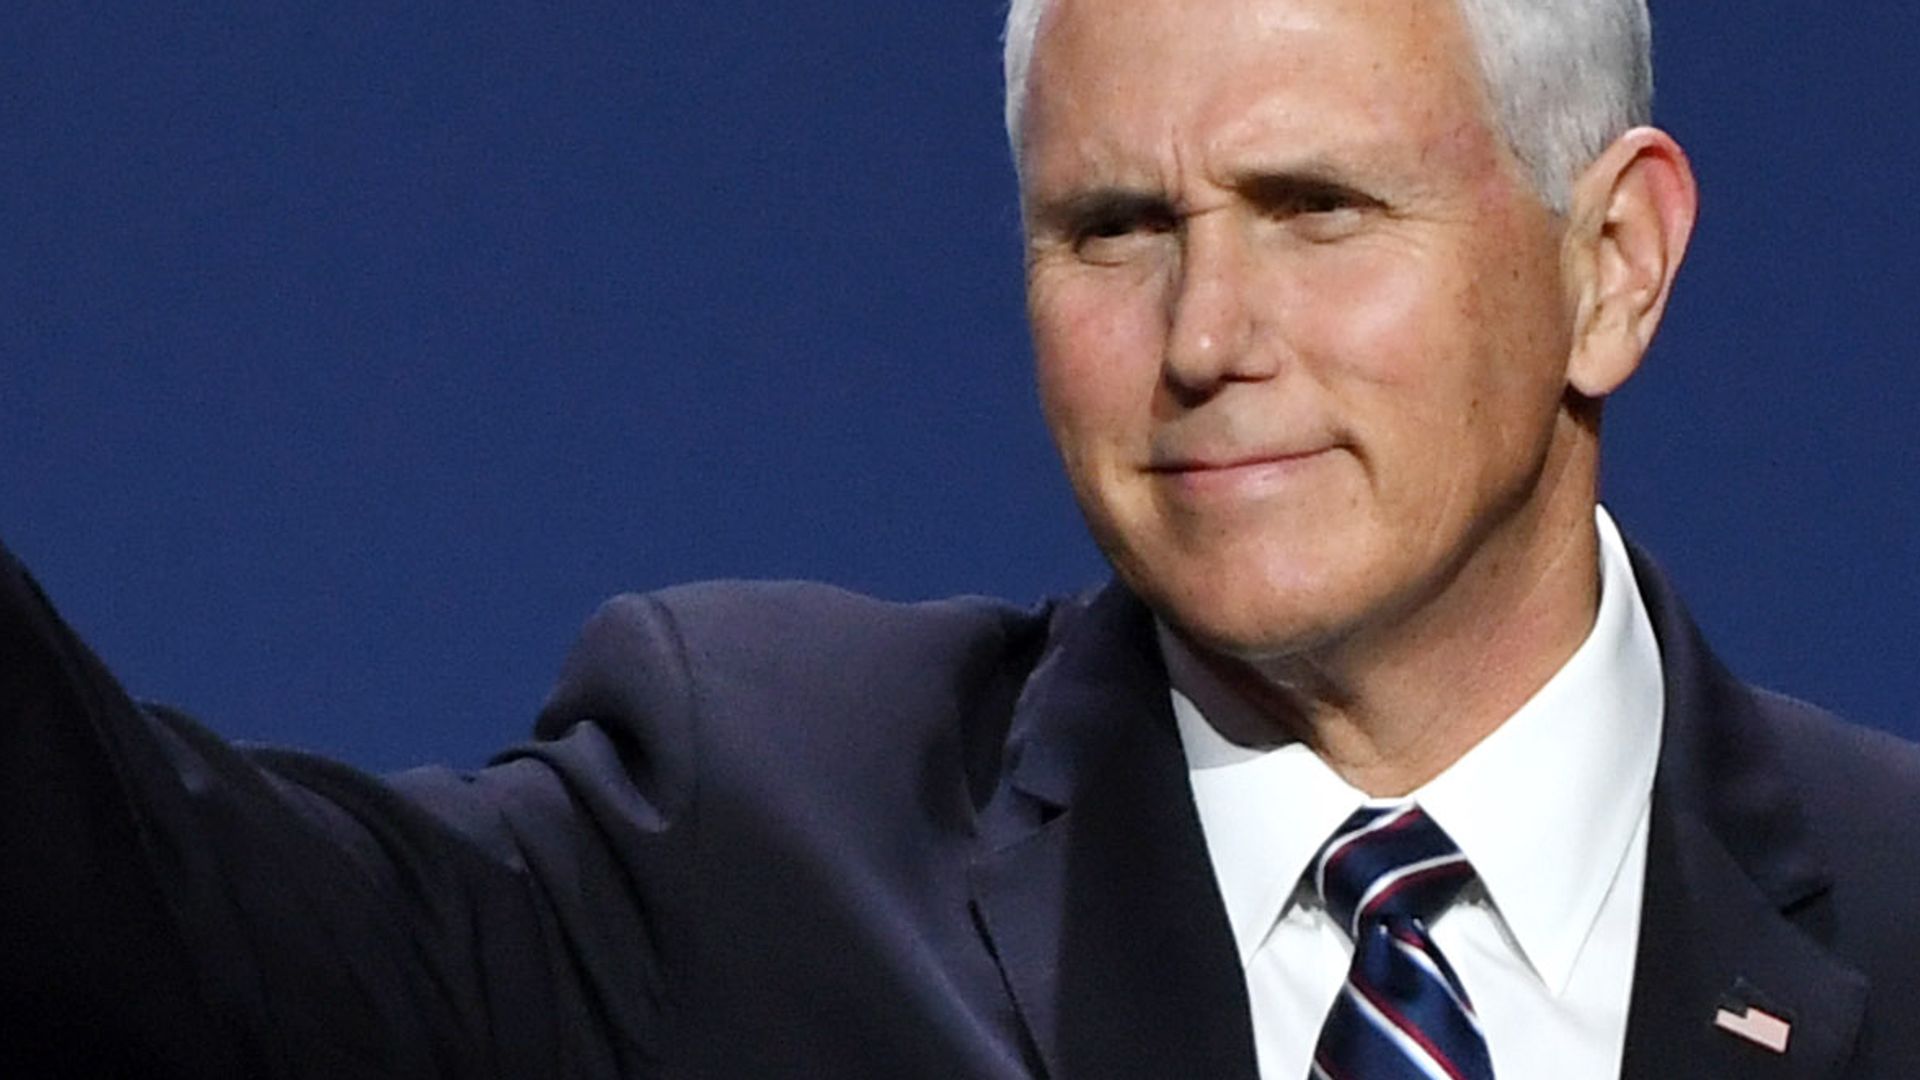 Former VP Mike Pence may testify at the trial related to former President Donald Trump's alleged attempts to overturn the 2020 election.